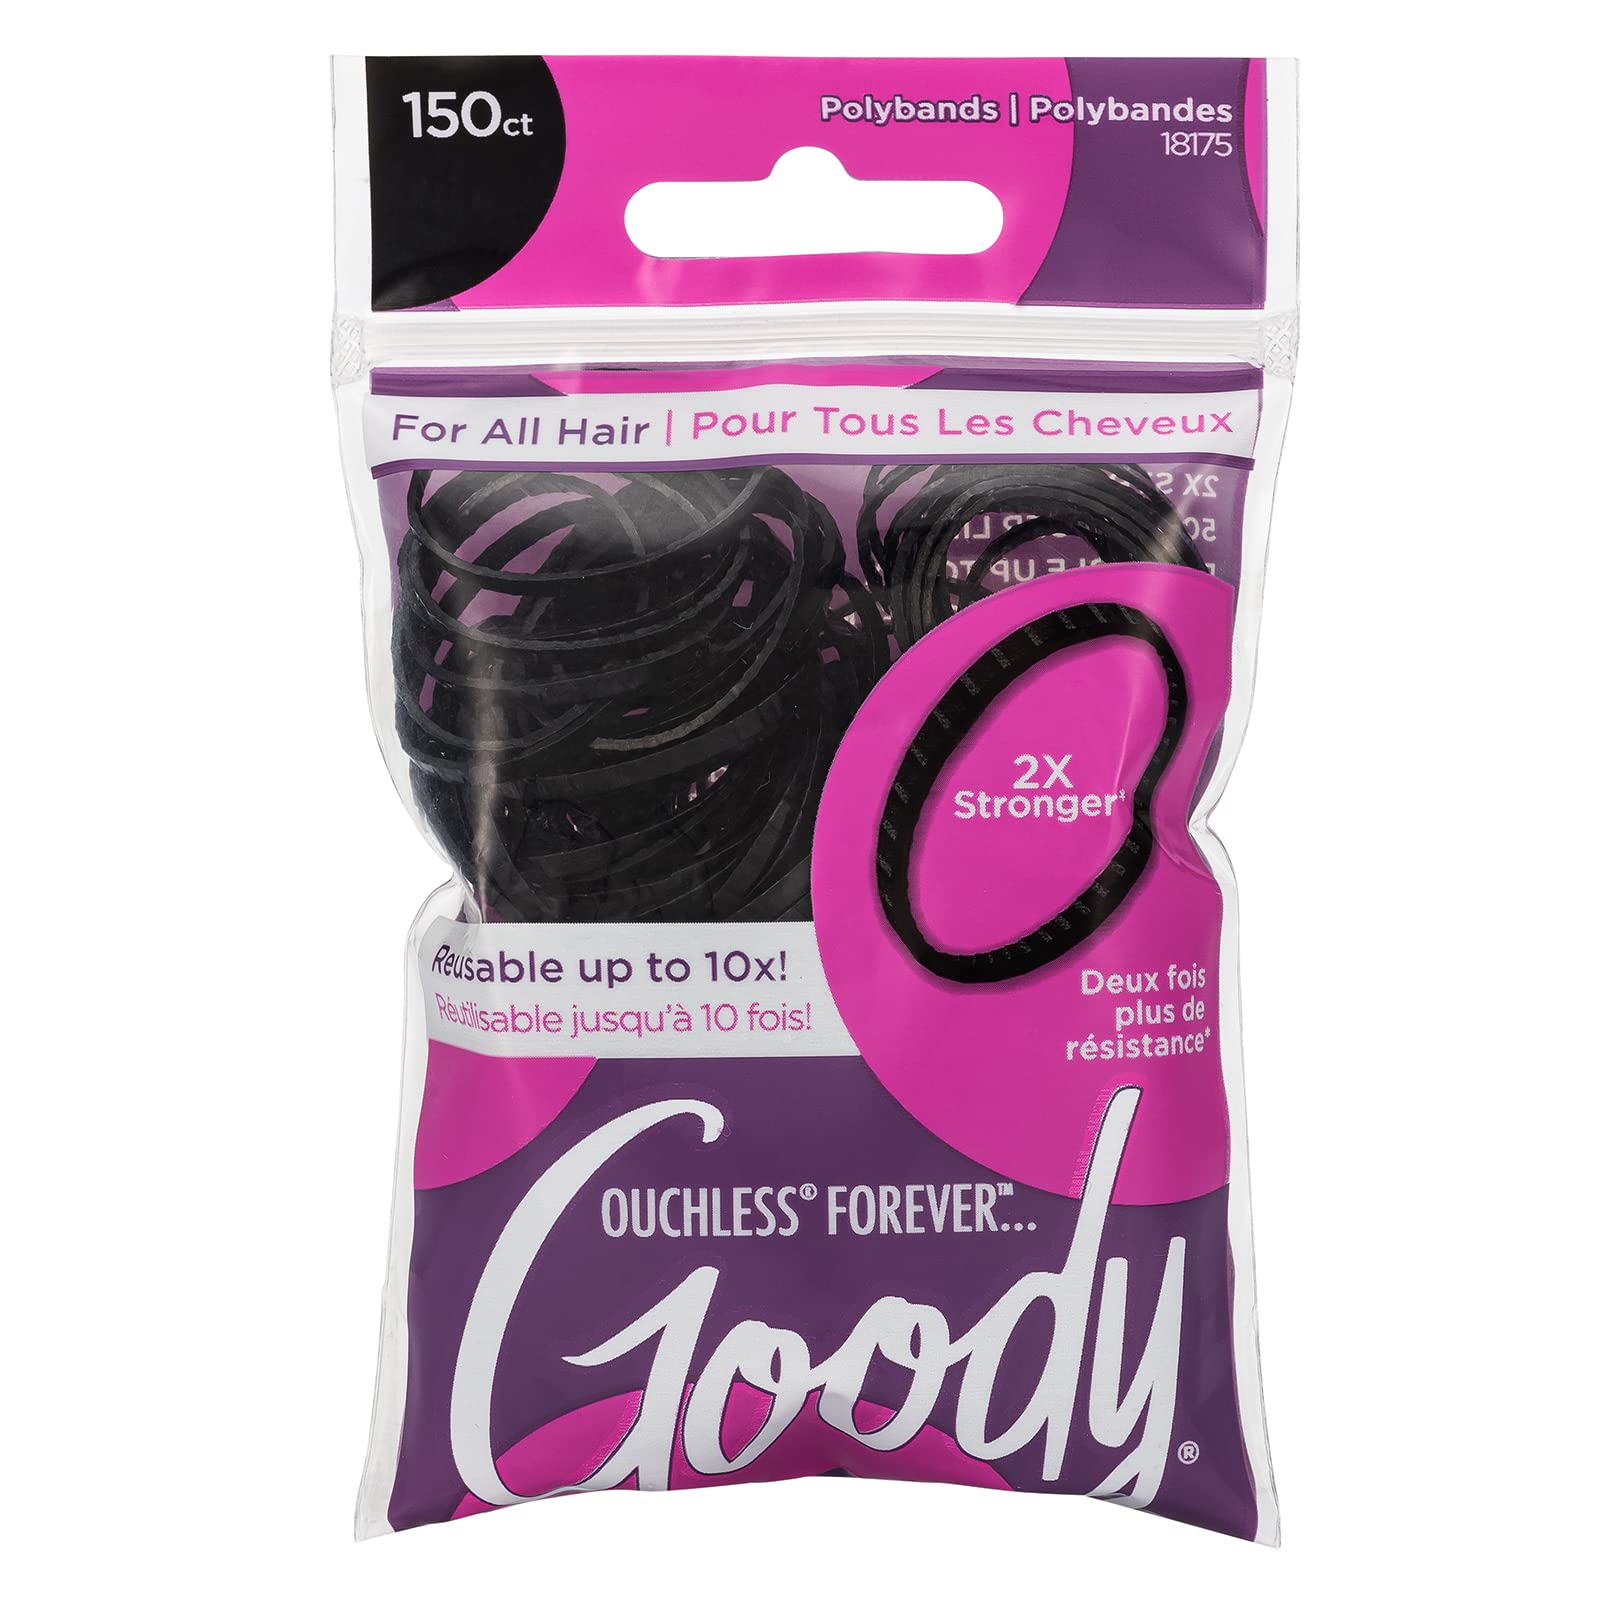 Goody Ouchless Womens Polyband Elastic Hair Tie - 150 Count, Black - Fine Hair - Hair Accessories to Style With Ease and Keep Your Hair Secured - Perfect for Fun and Unique Hairstyles - Pain-Free